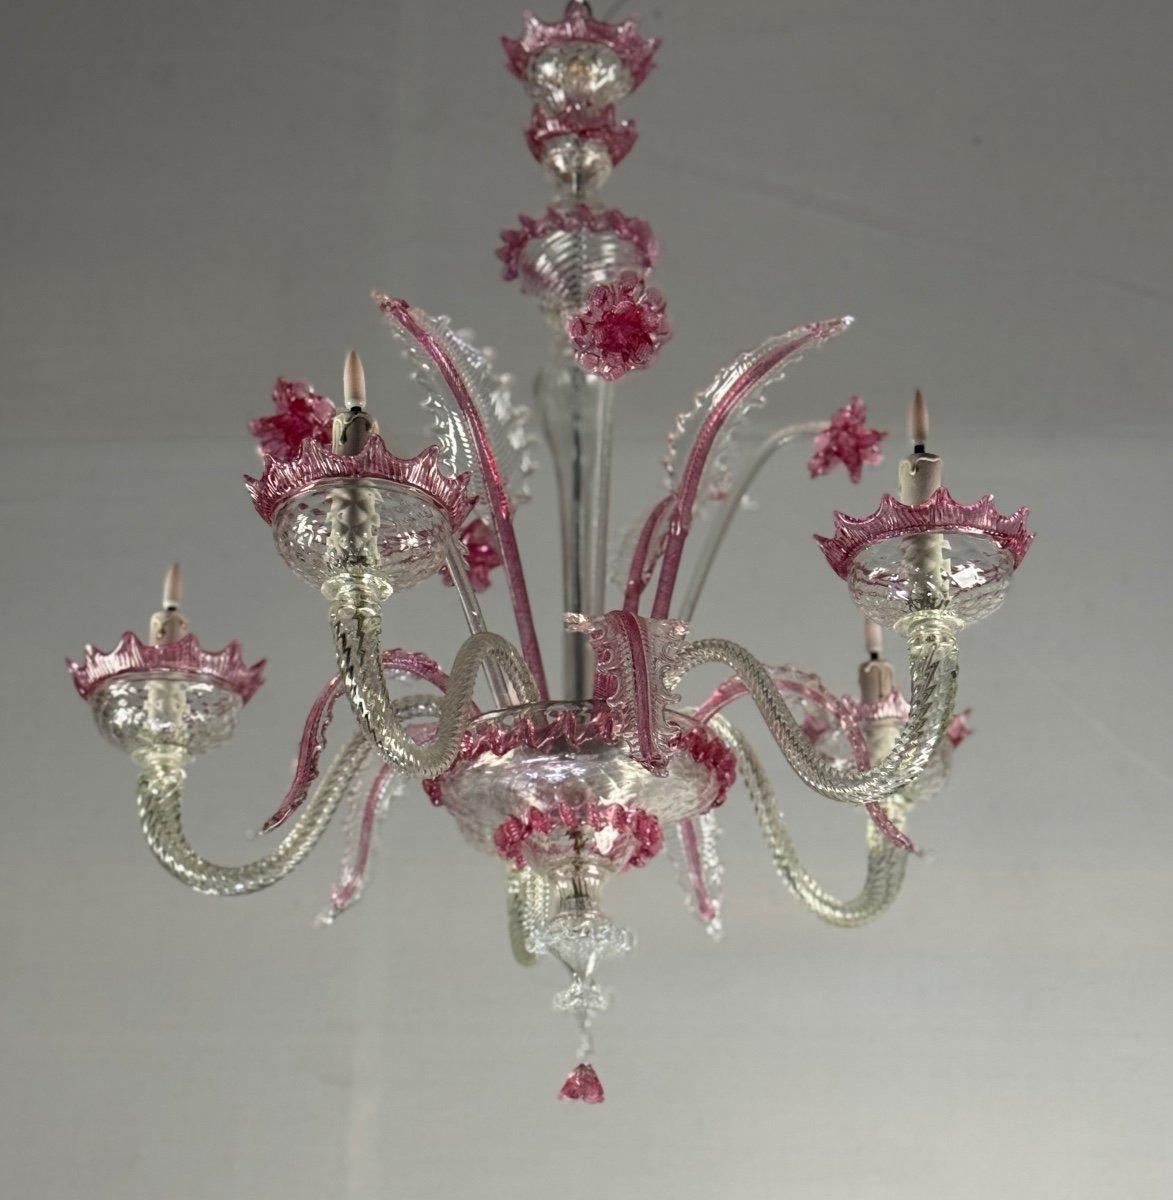 Venetian chandelier in colorless and red Murano glass 5 arms of light, 

New electrification 

Around 1950